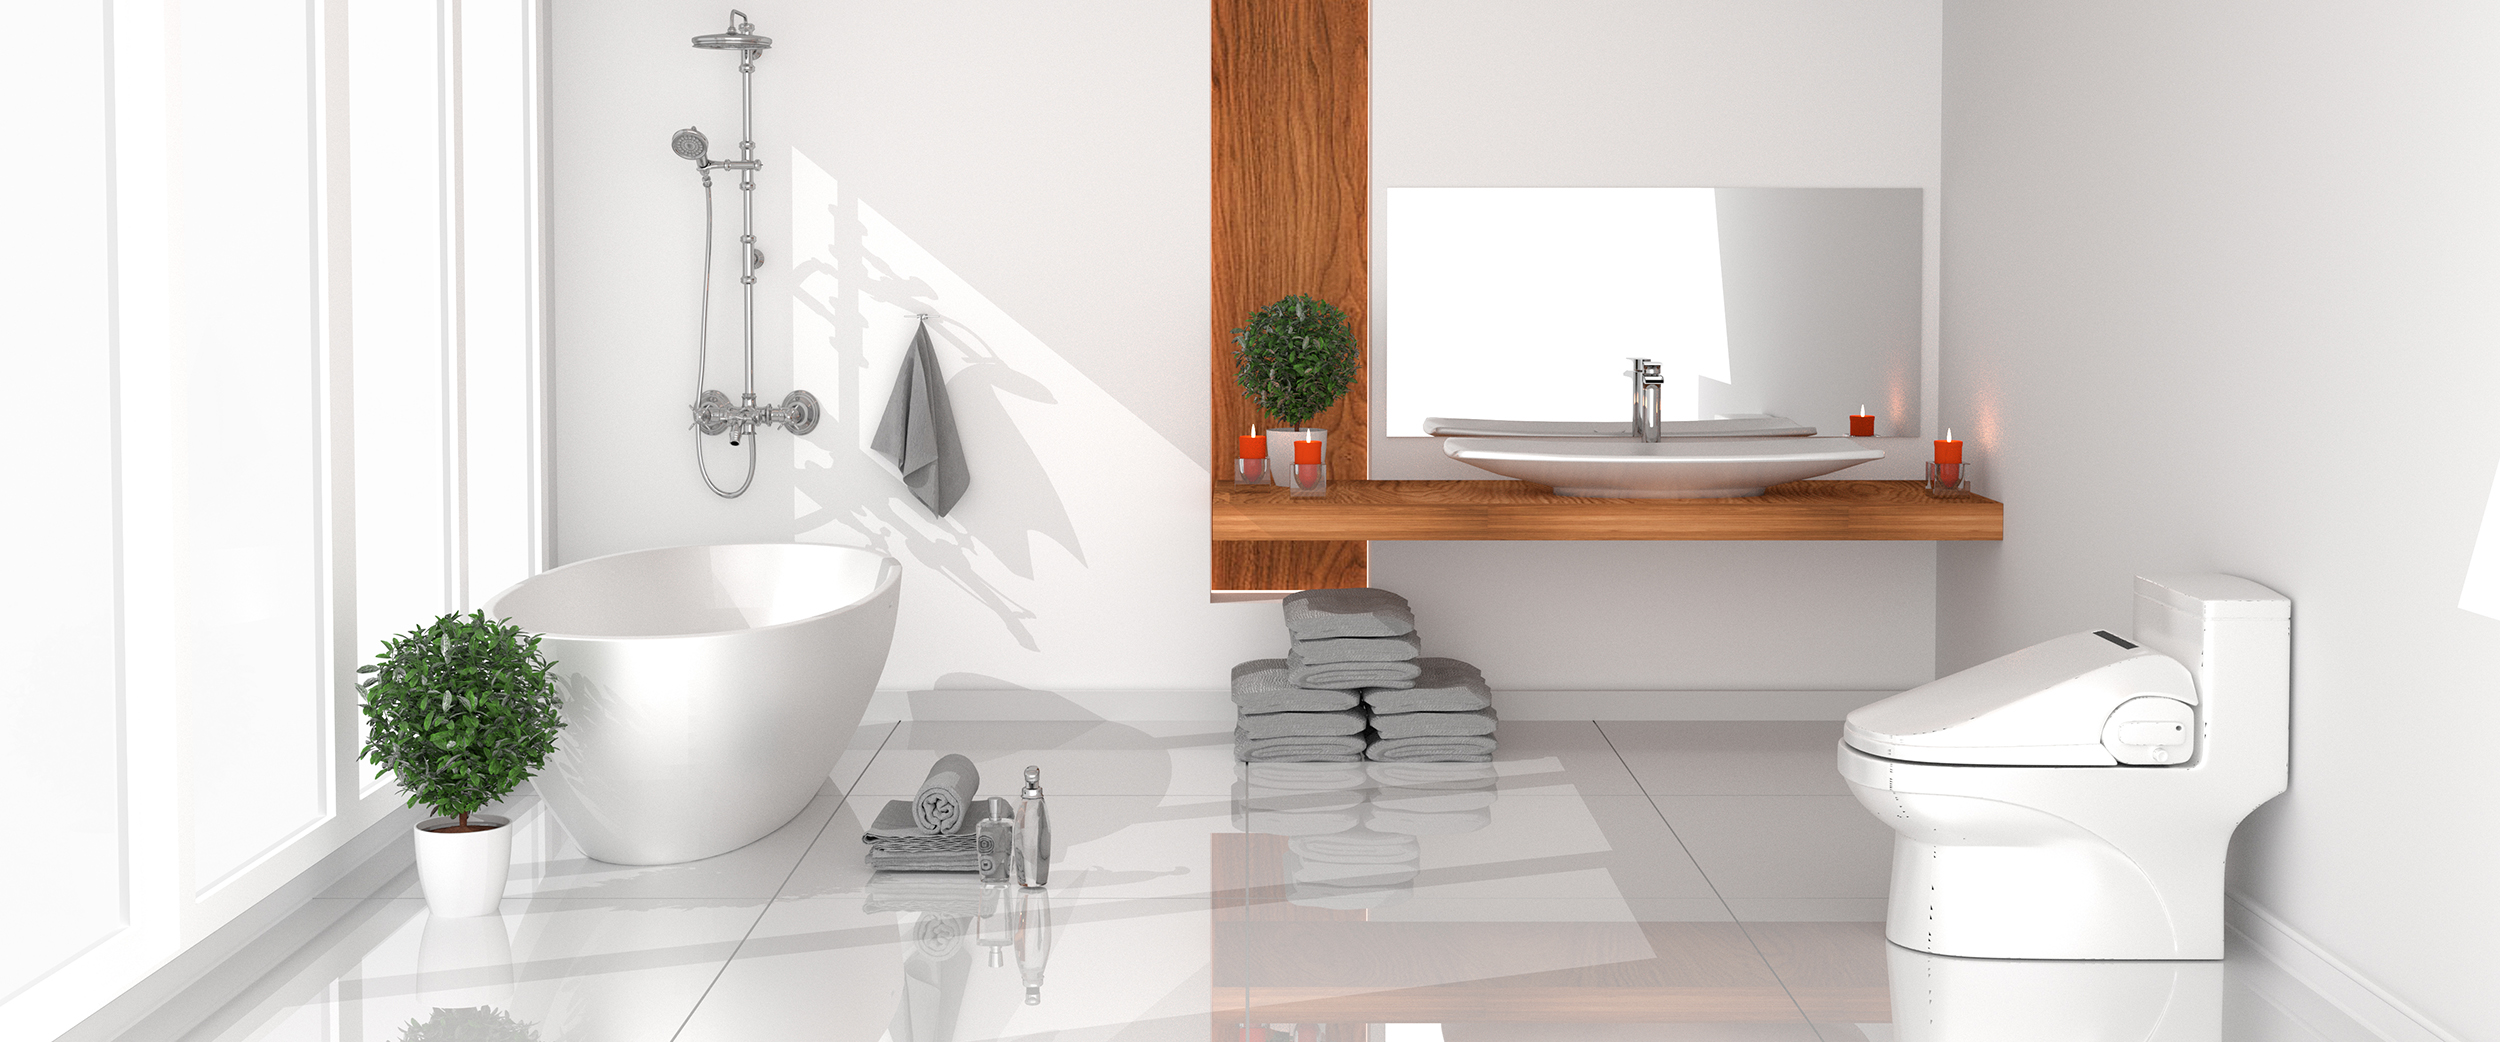 Toilets of the Future: How To Choose a Modern Toilet | Belman Homes